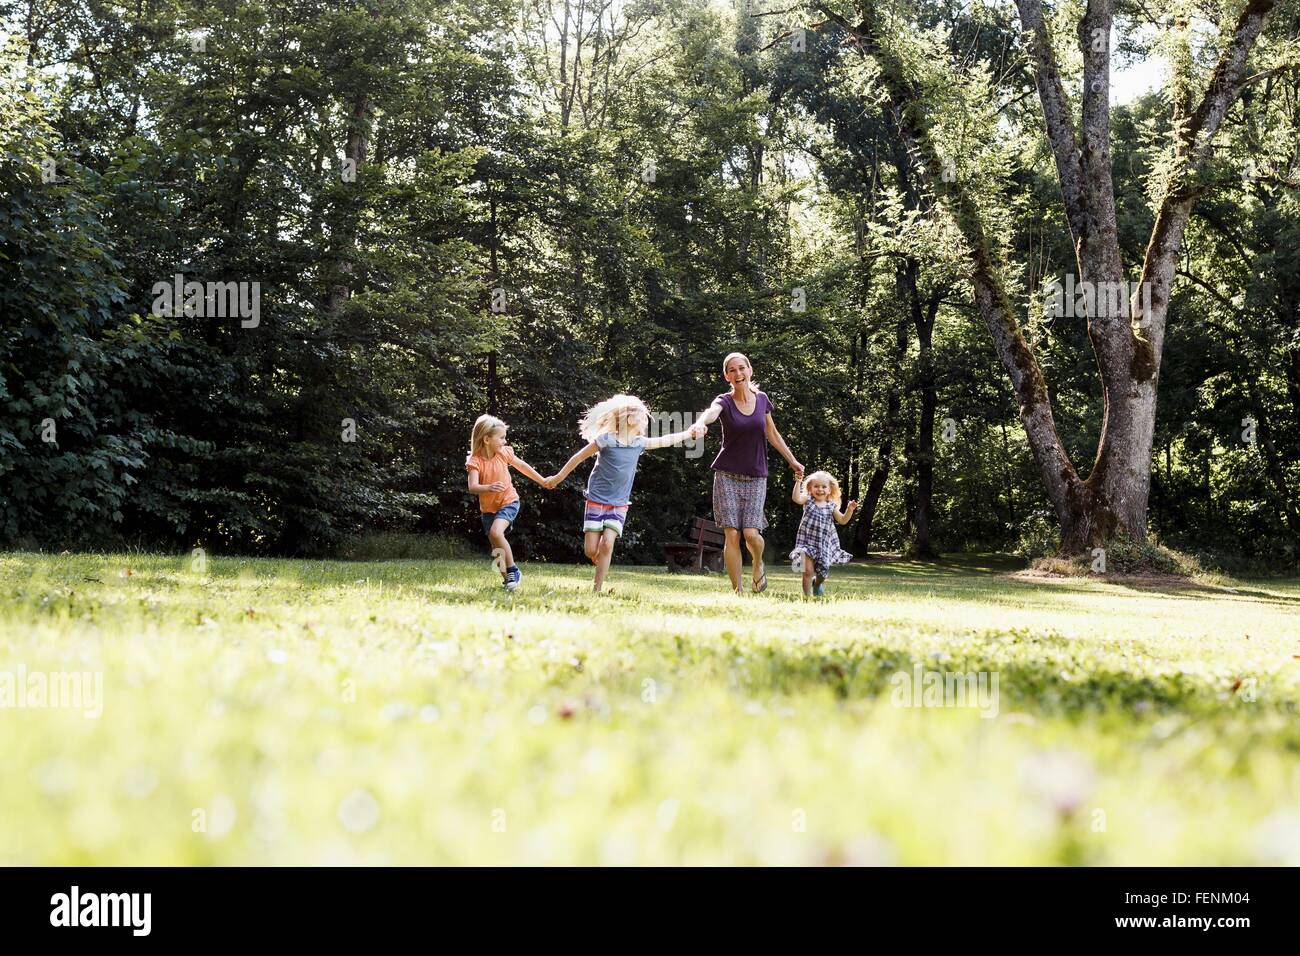 Mid adult woman and three young daughters holding hands and running in park Stock Photo